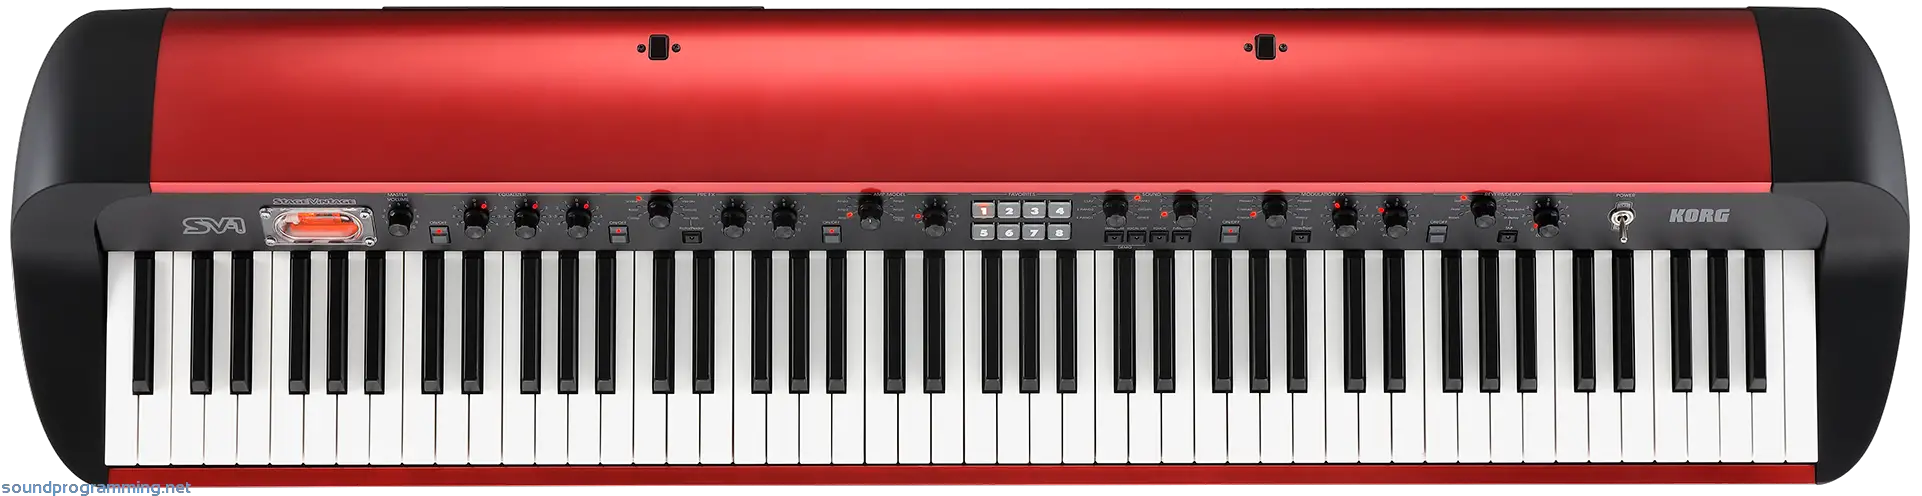 Korg SV-1 88 Red Top View